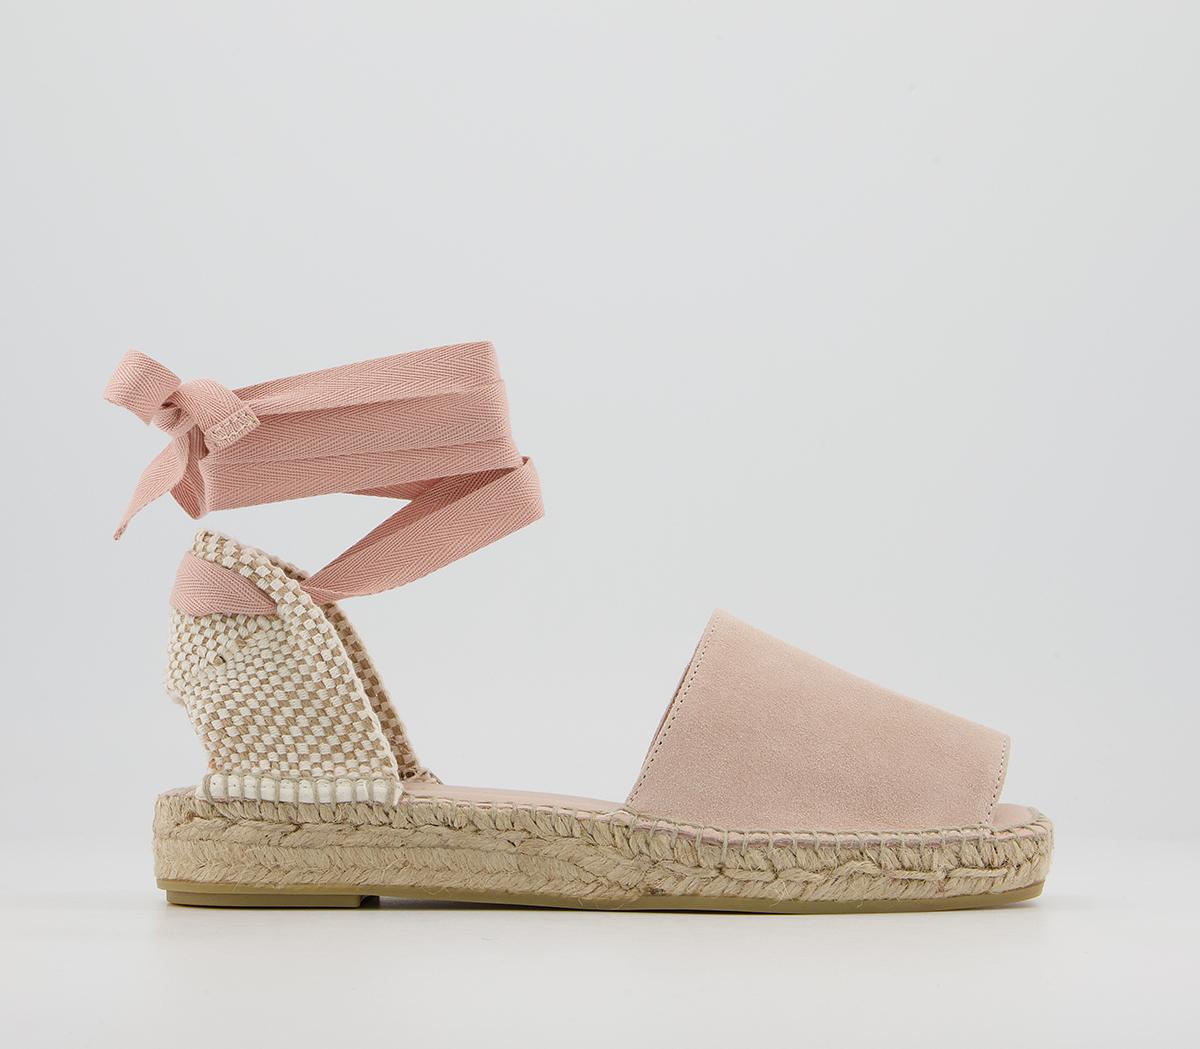 Gaimo for OFFICE Verbena Ankle Tie Espadrilles Pink Suede - Flat Shoes ...